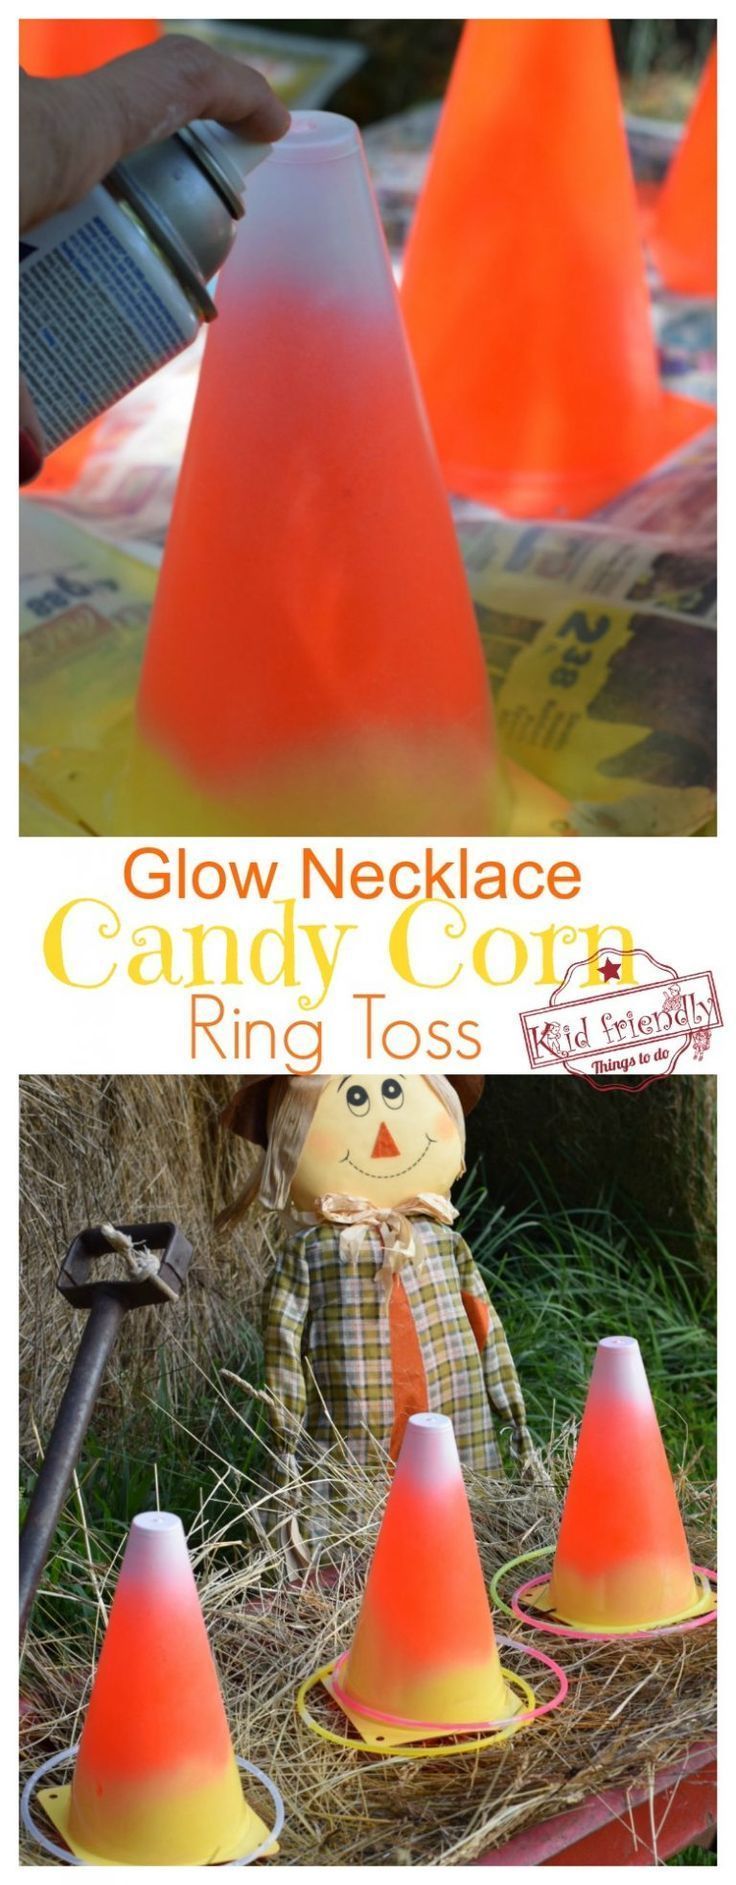 Easy DIY Candy Corn Ring Toss with Glow Necklaces for a Fun Fall, Halloween, or Thanksgiving Game - Easy DIY Candy Corn Ring Toss with Glow Necklaces for a Fun Fall, Halloween, or Thanksgiving Game -   17 diy Kids fall ideas